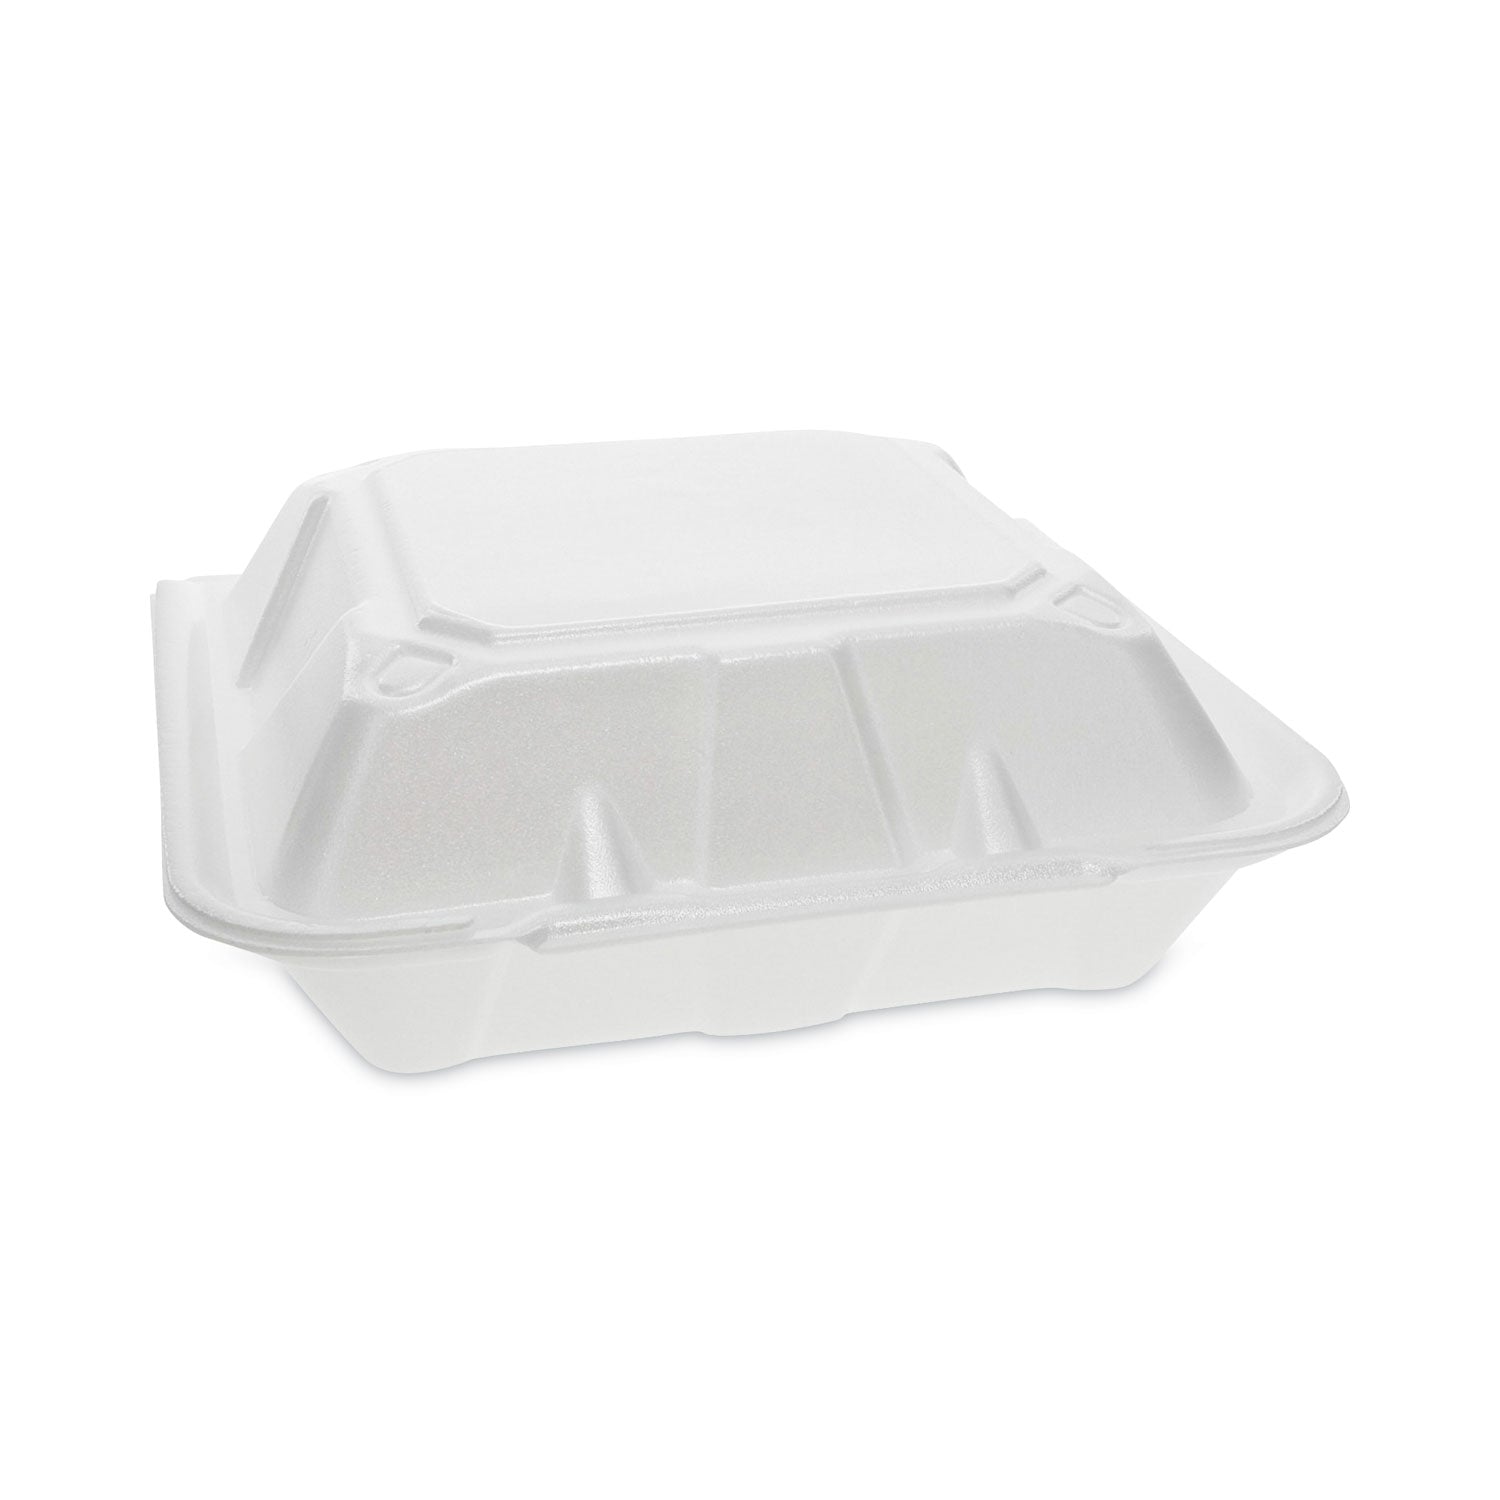 vented-foam-hinged-lid-container-dual-tab-lock-3-compartment-913-x-9-x-325-white-150-carton_pctytd199030000 - 1